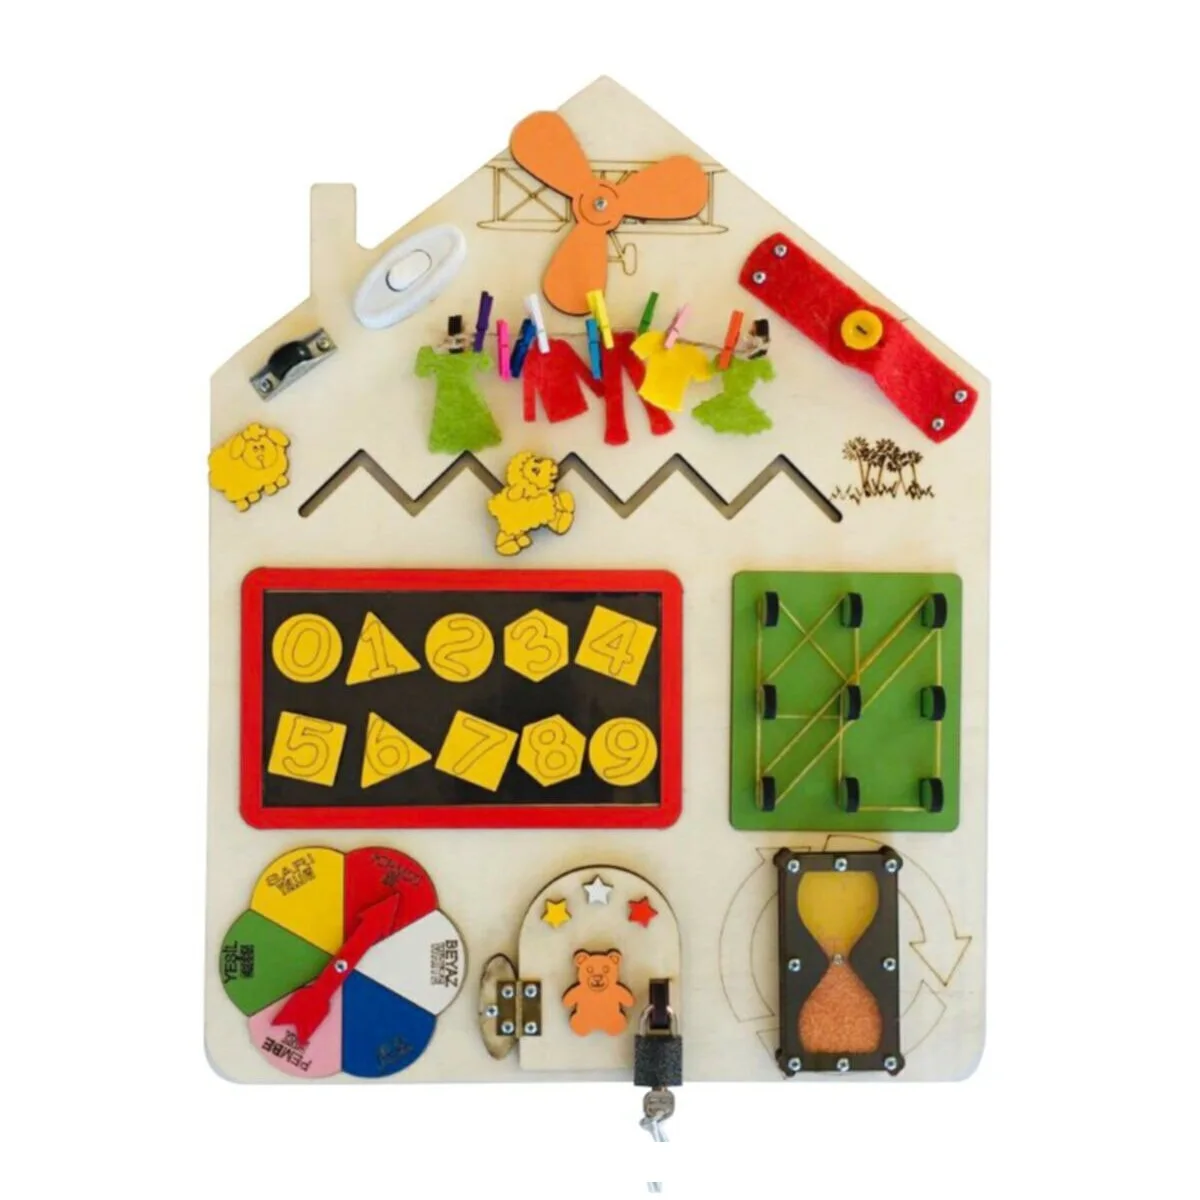 Фото - Montessori Children Busy Board Accessories Wood DIY Toy Material Early Education Activity Board Parts For Basic Skills Learning children busy board accessories wood diy toy montessori material early education activity toddler toys for basic skills learning